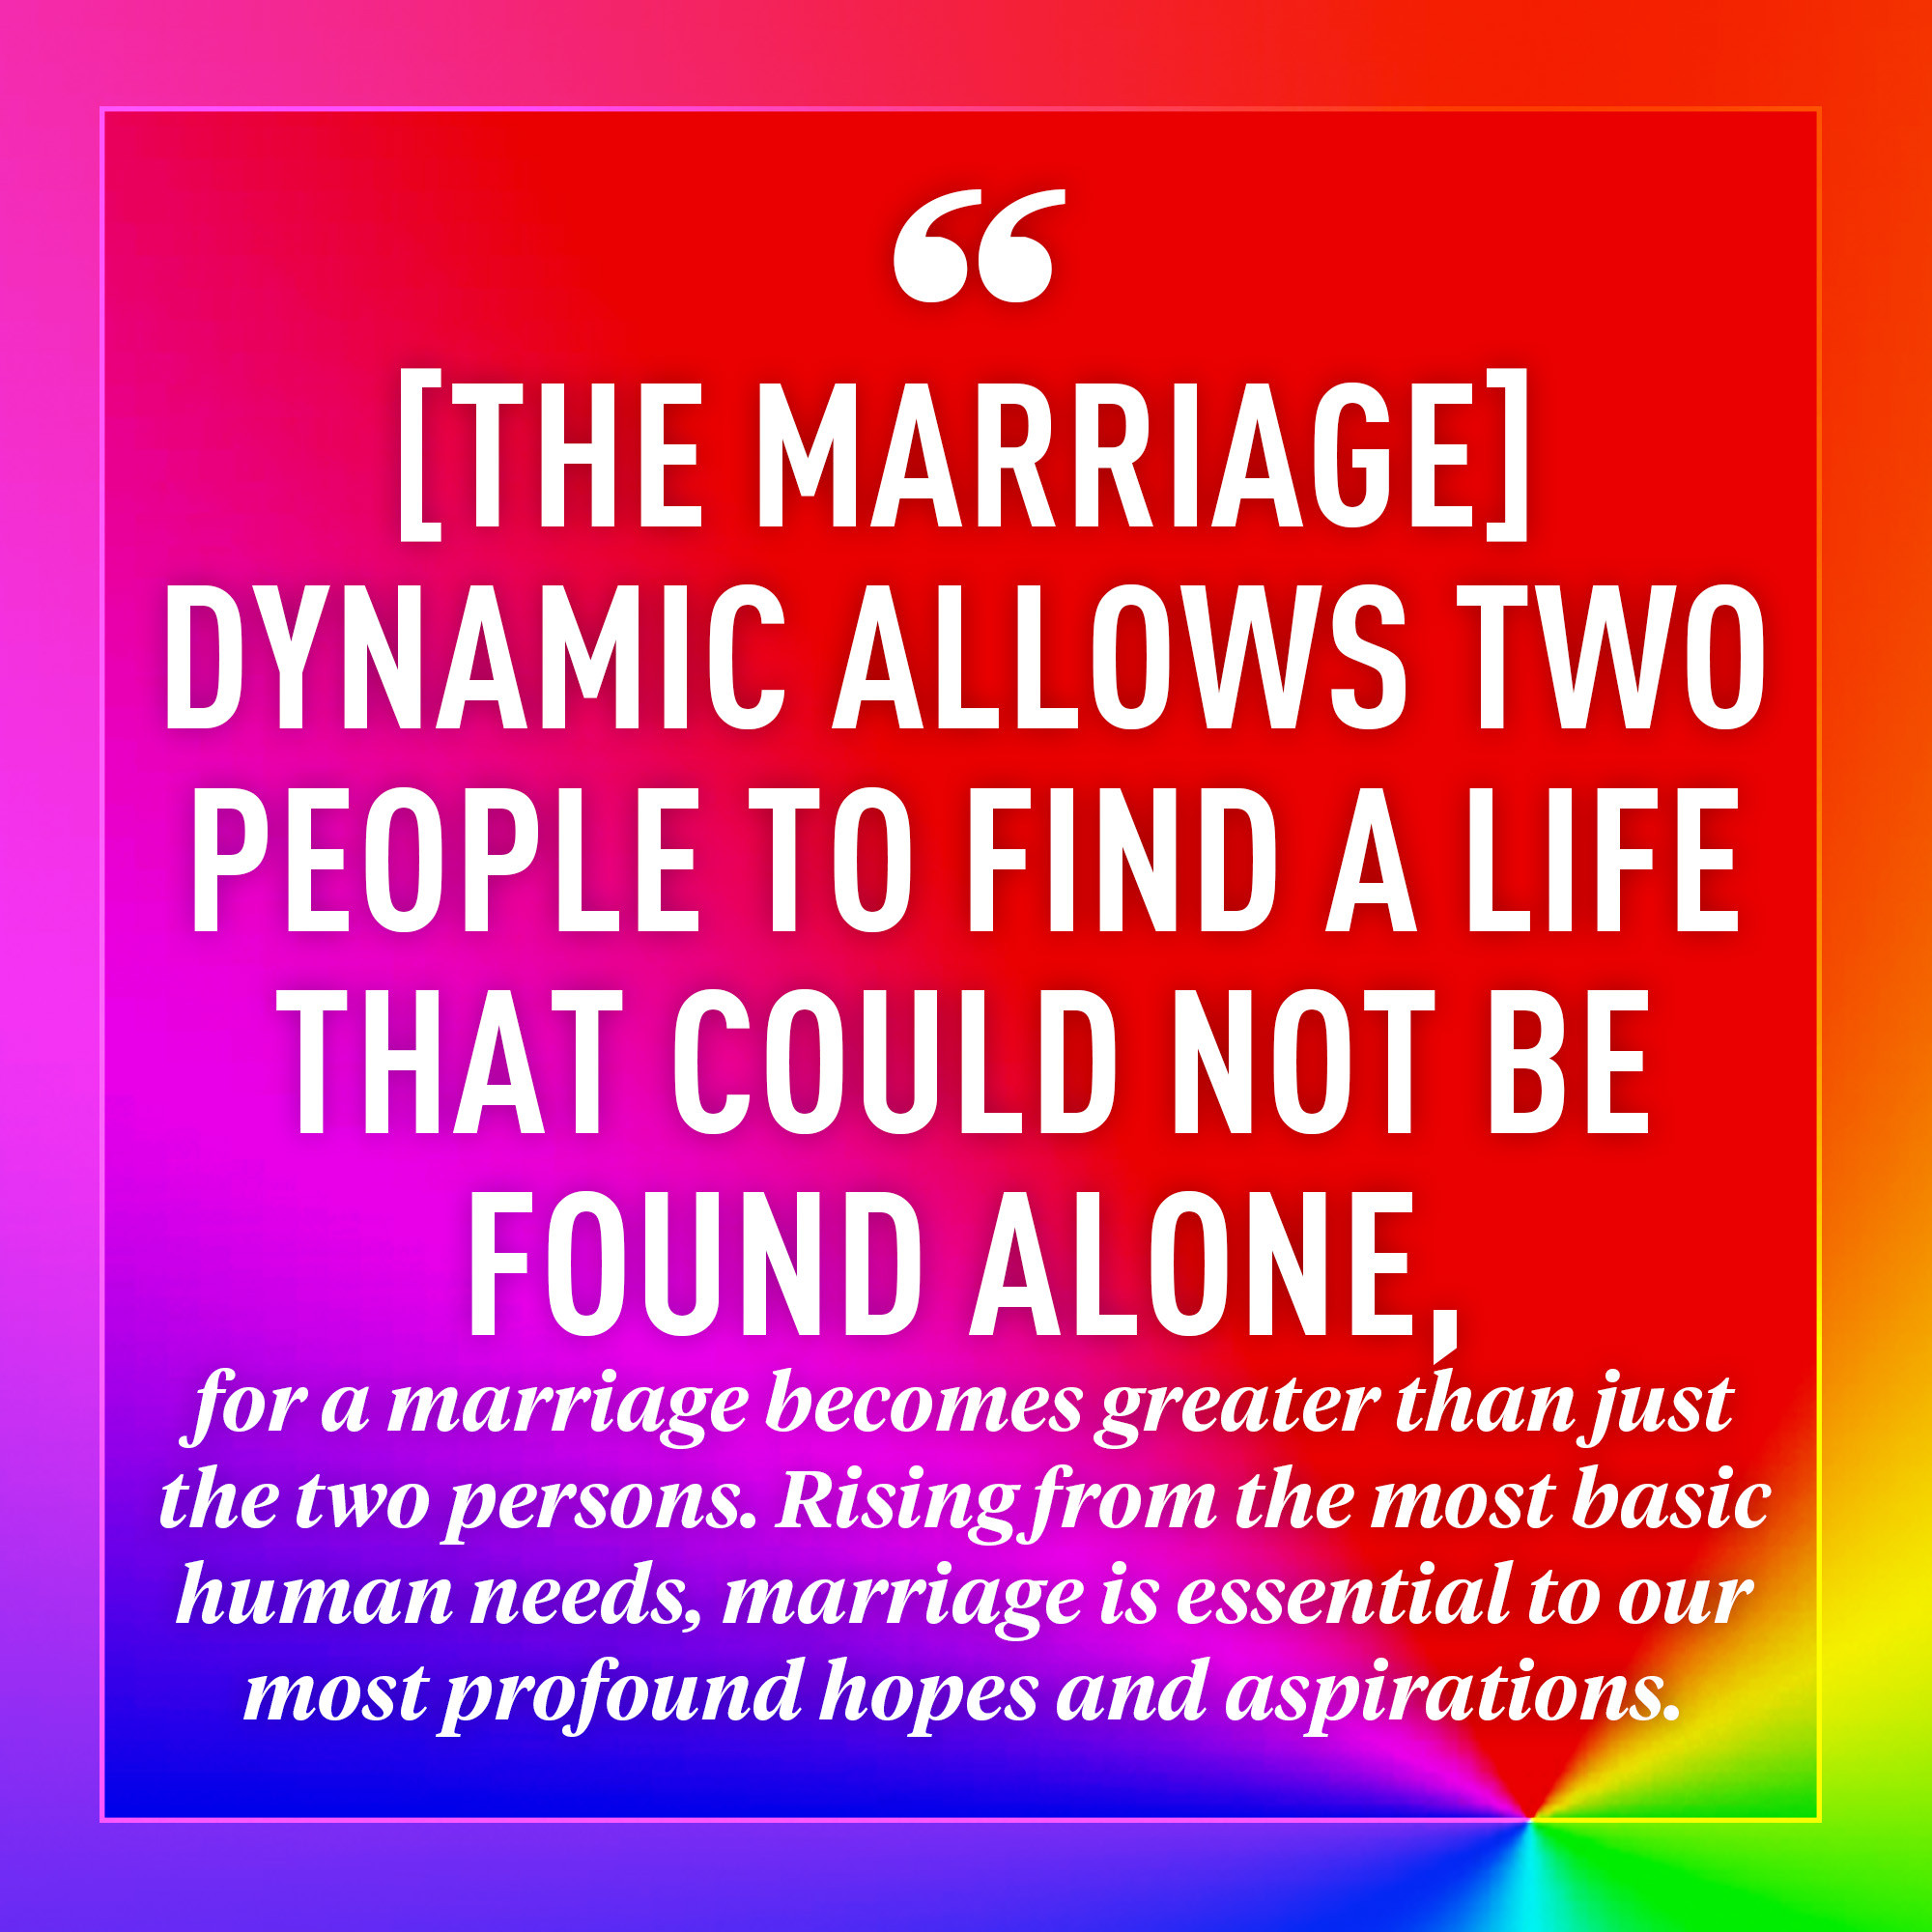 Quotes About Gay Marriage
 The 10 Most Moving Quotes From the Supreme Court s Same